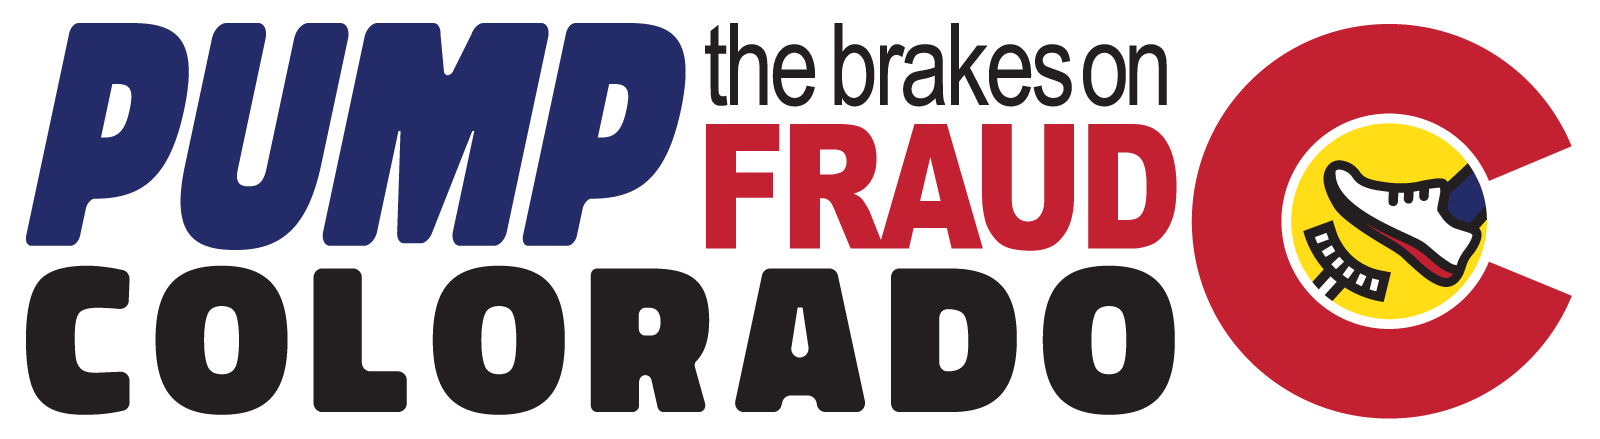 Pump the brakes on fraud colorado logo with foot on a car brake pedal inside the C of Colorado